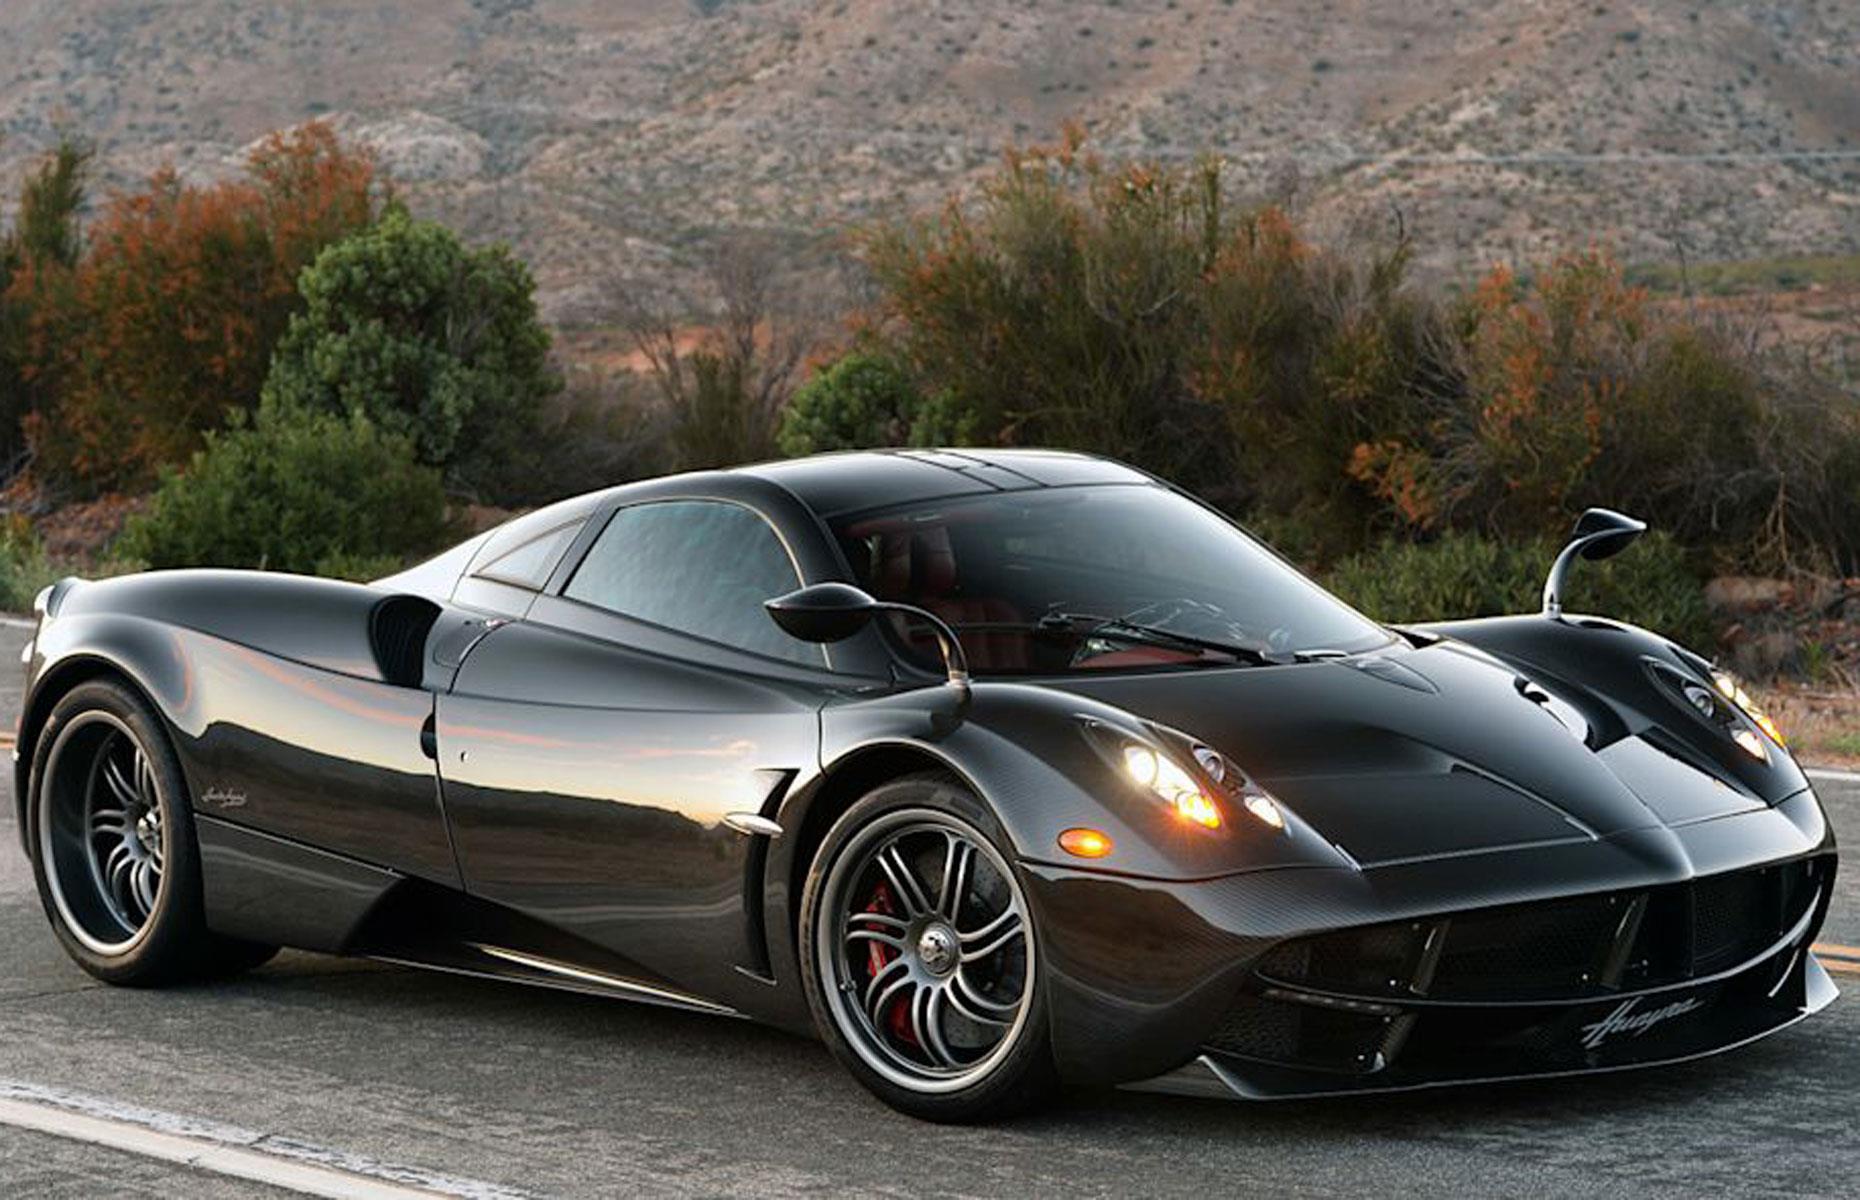 Mark Zuckerberg's taste in cars used to be pretty modest. The Facebook boss had long favoured models such as the VW Golf GTI and Honda Fit but hit the headlines in 2014 when he allegedly invested in a head-turning Pagani Huayra. The carbon-fibre stunner is thought to have set him back around $1.4 million (£837k).